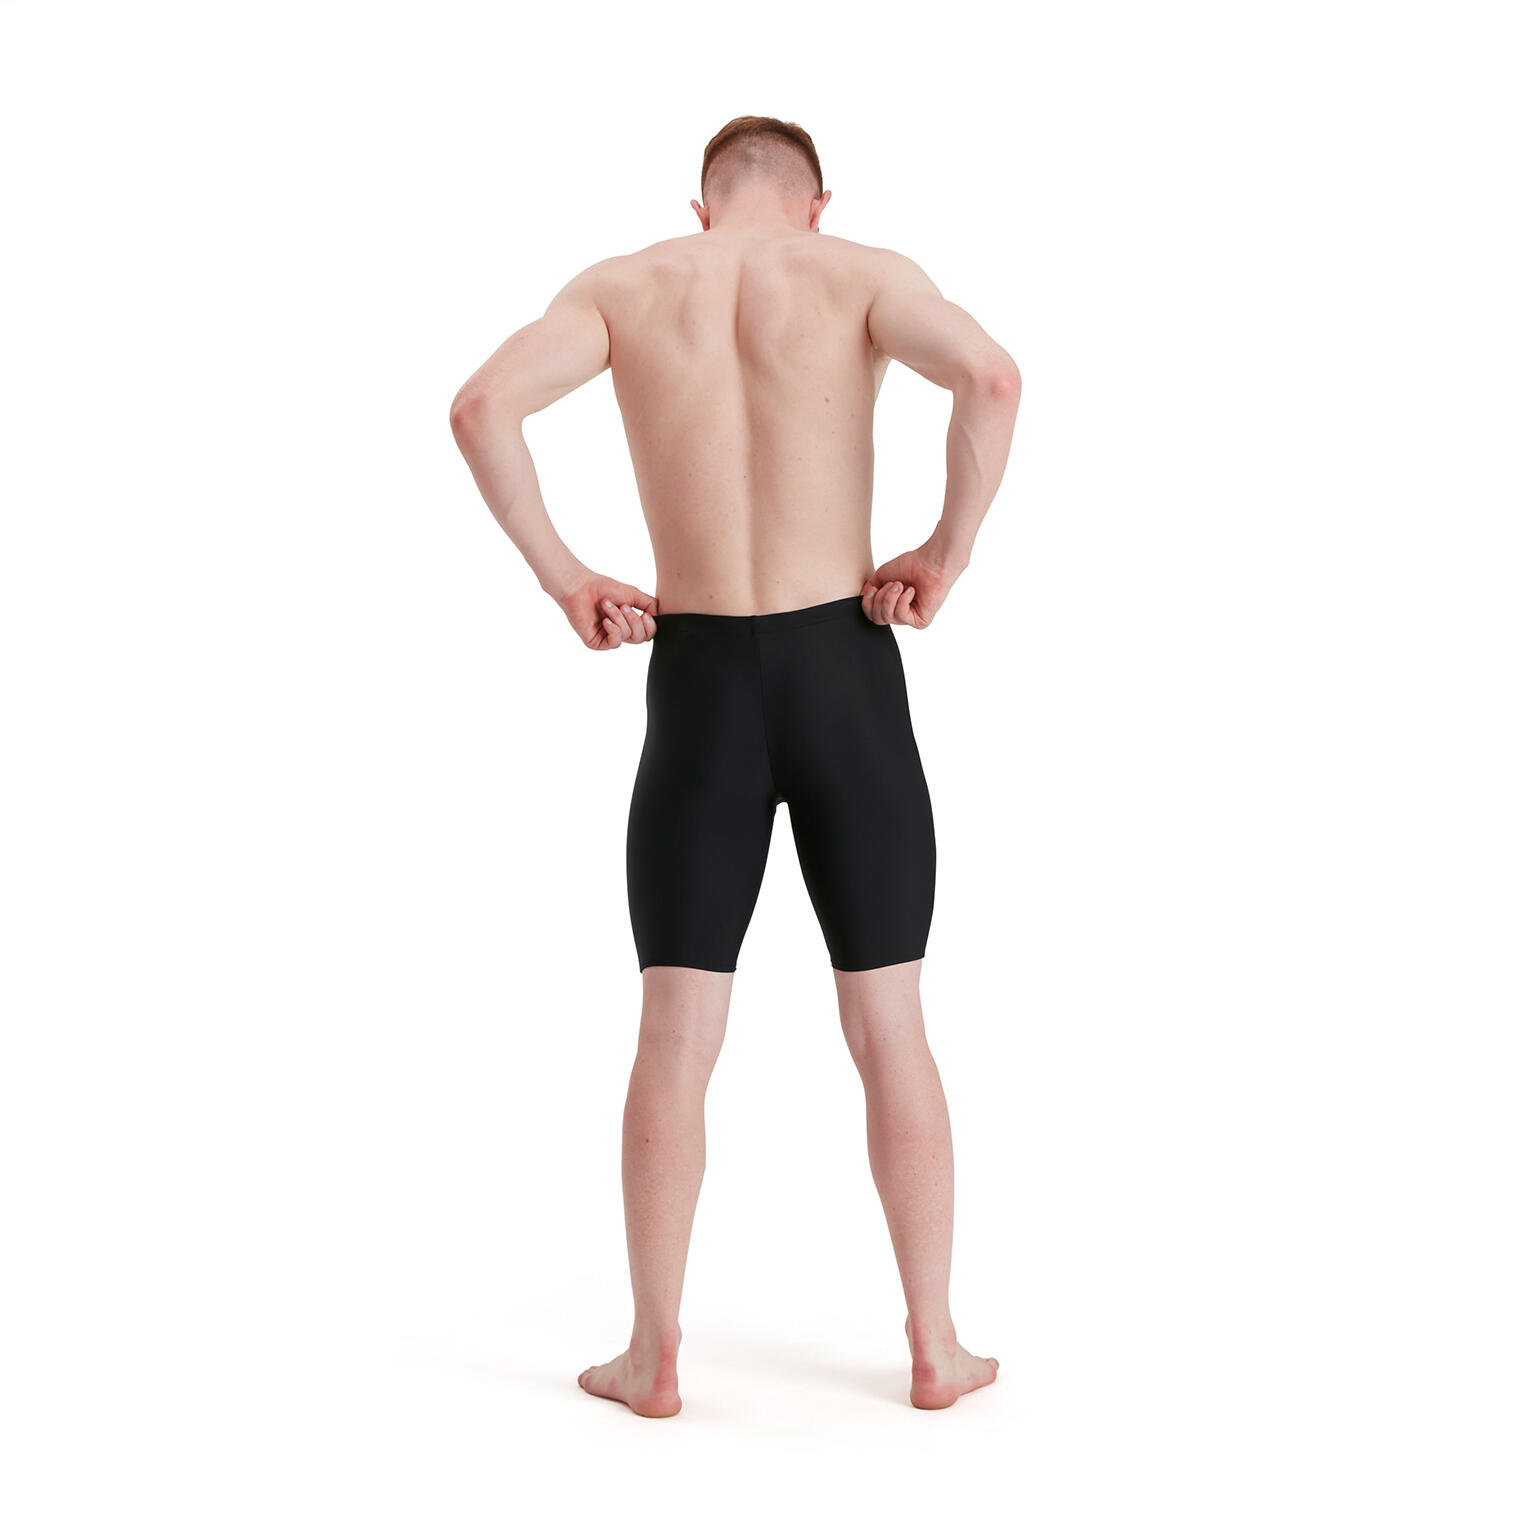 Medley Logo Adult Male Swimming Jammer 3/5